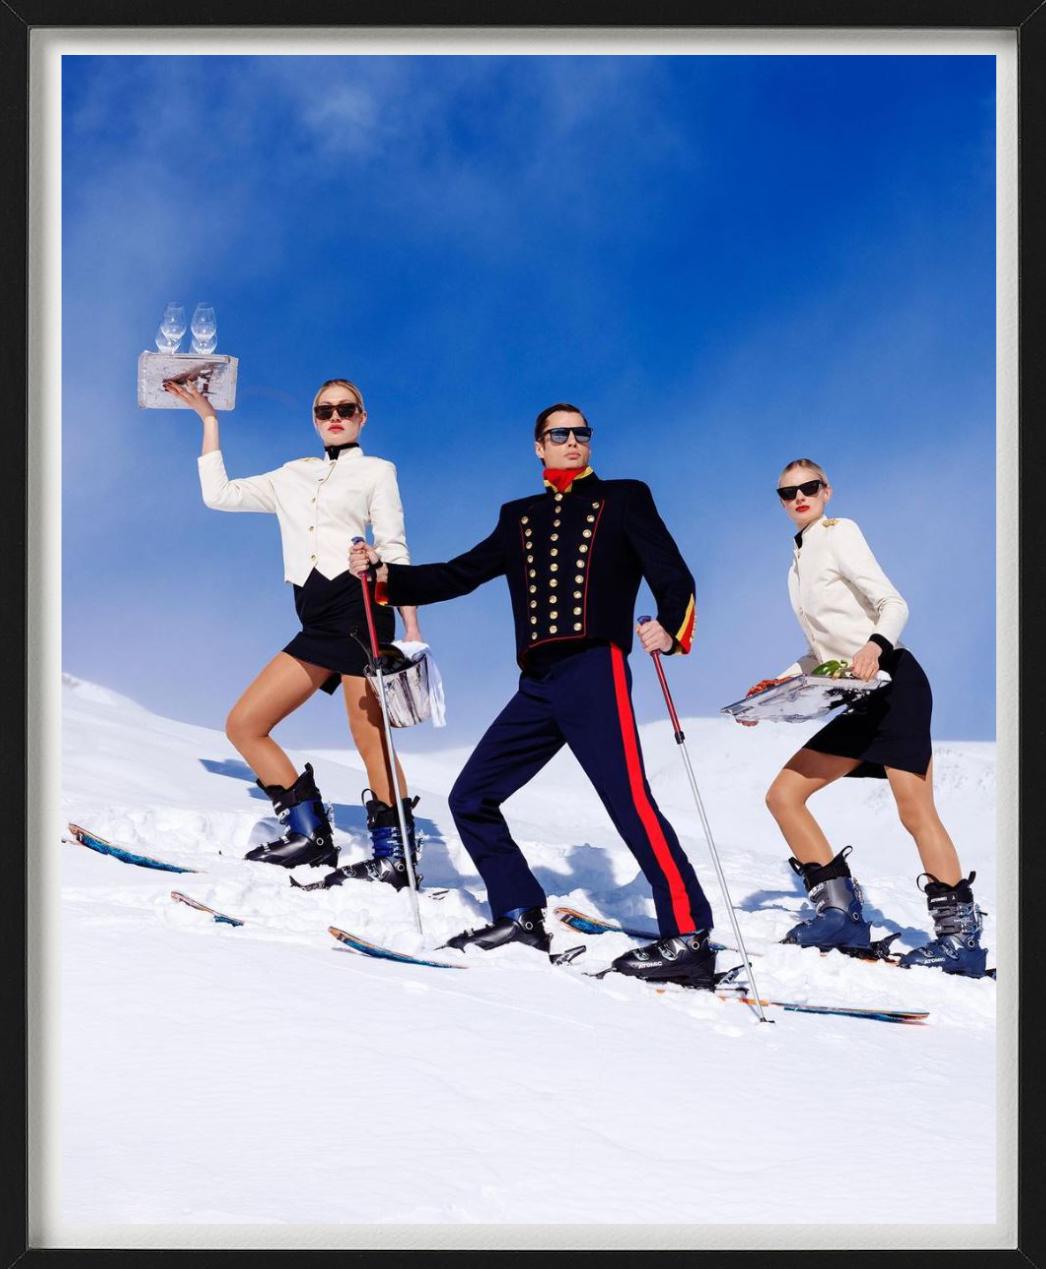 'Room Service' - Waiters in uniform skiing on piste, fine art photography, 2023 - Contemporary Photograph by Tony Kelly